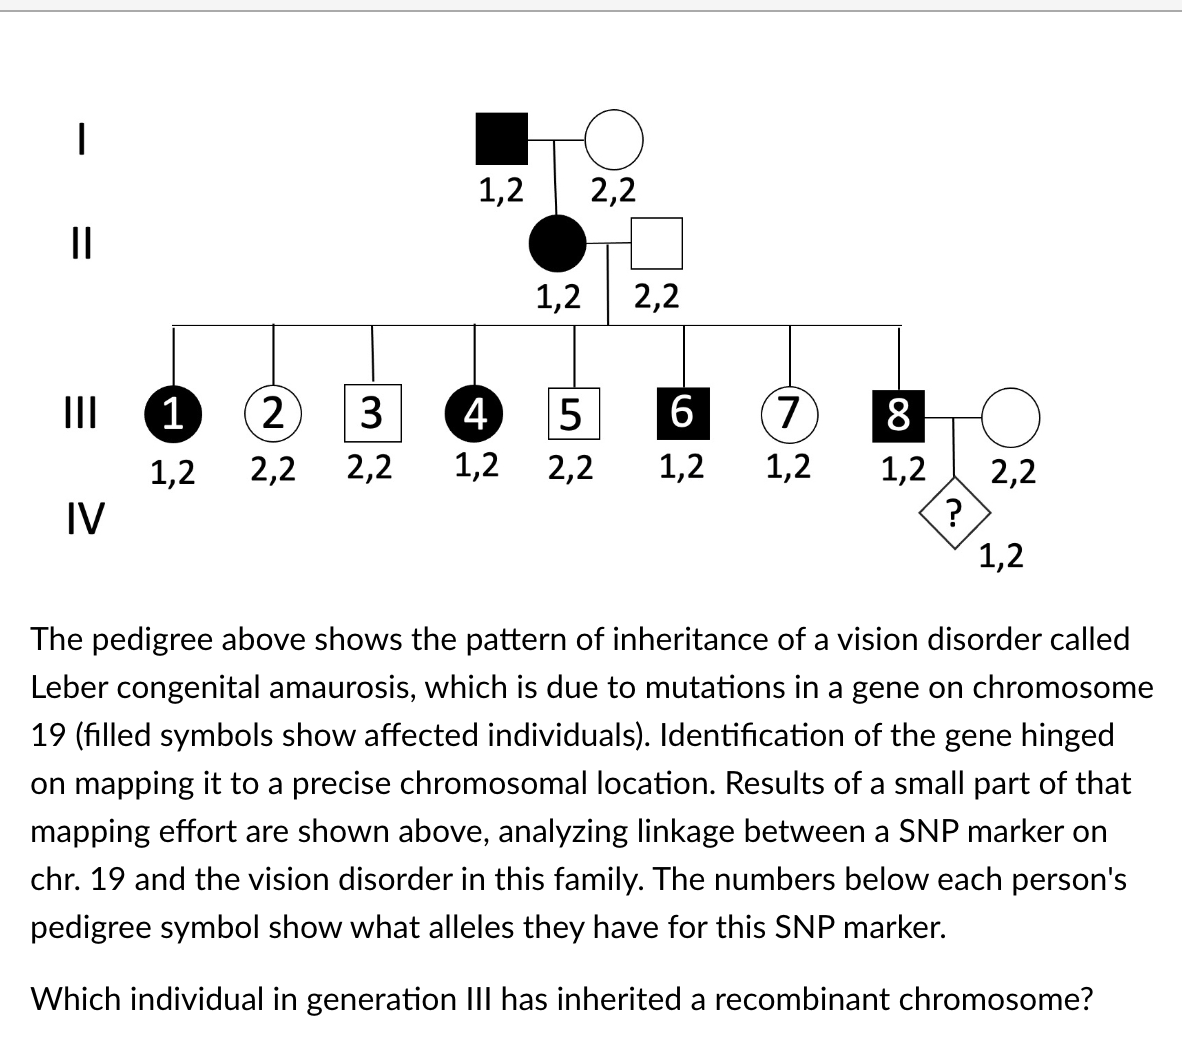 ||
|||
IV
1,2
2,2
1,2 2,2
1 2 3
4
5 6 7
1,2 2,2 2,2 1,2 2,2 1,2 1,2
8
1,2
?
2,2
1,2
The pedigree above shows the pattern of inheritance of a vision disorder called
Leber congenital amaurosis, which is due to mutations in a gene on chromosome
19 (filled symbols show affected individuals). Identification of the gene hinged
on mapping it to a precise chromosomal location. Results of a small part of that
mapping effort are shown above, analyzing linkage between a SNP marker on
chr. 19 and the vision disorder in this family. The numbers below each person's
pedigree symbol show what alleles they have for this SNP marker.
Which individual in generation III has inherited a recombinant chromosome?